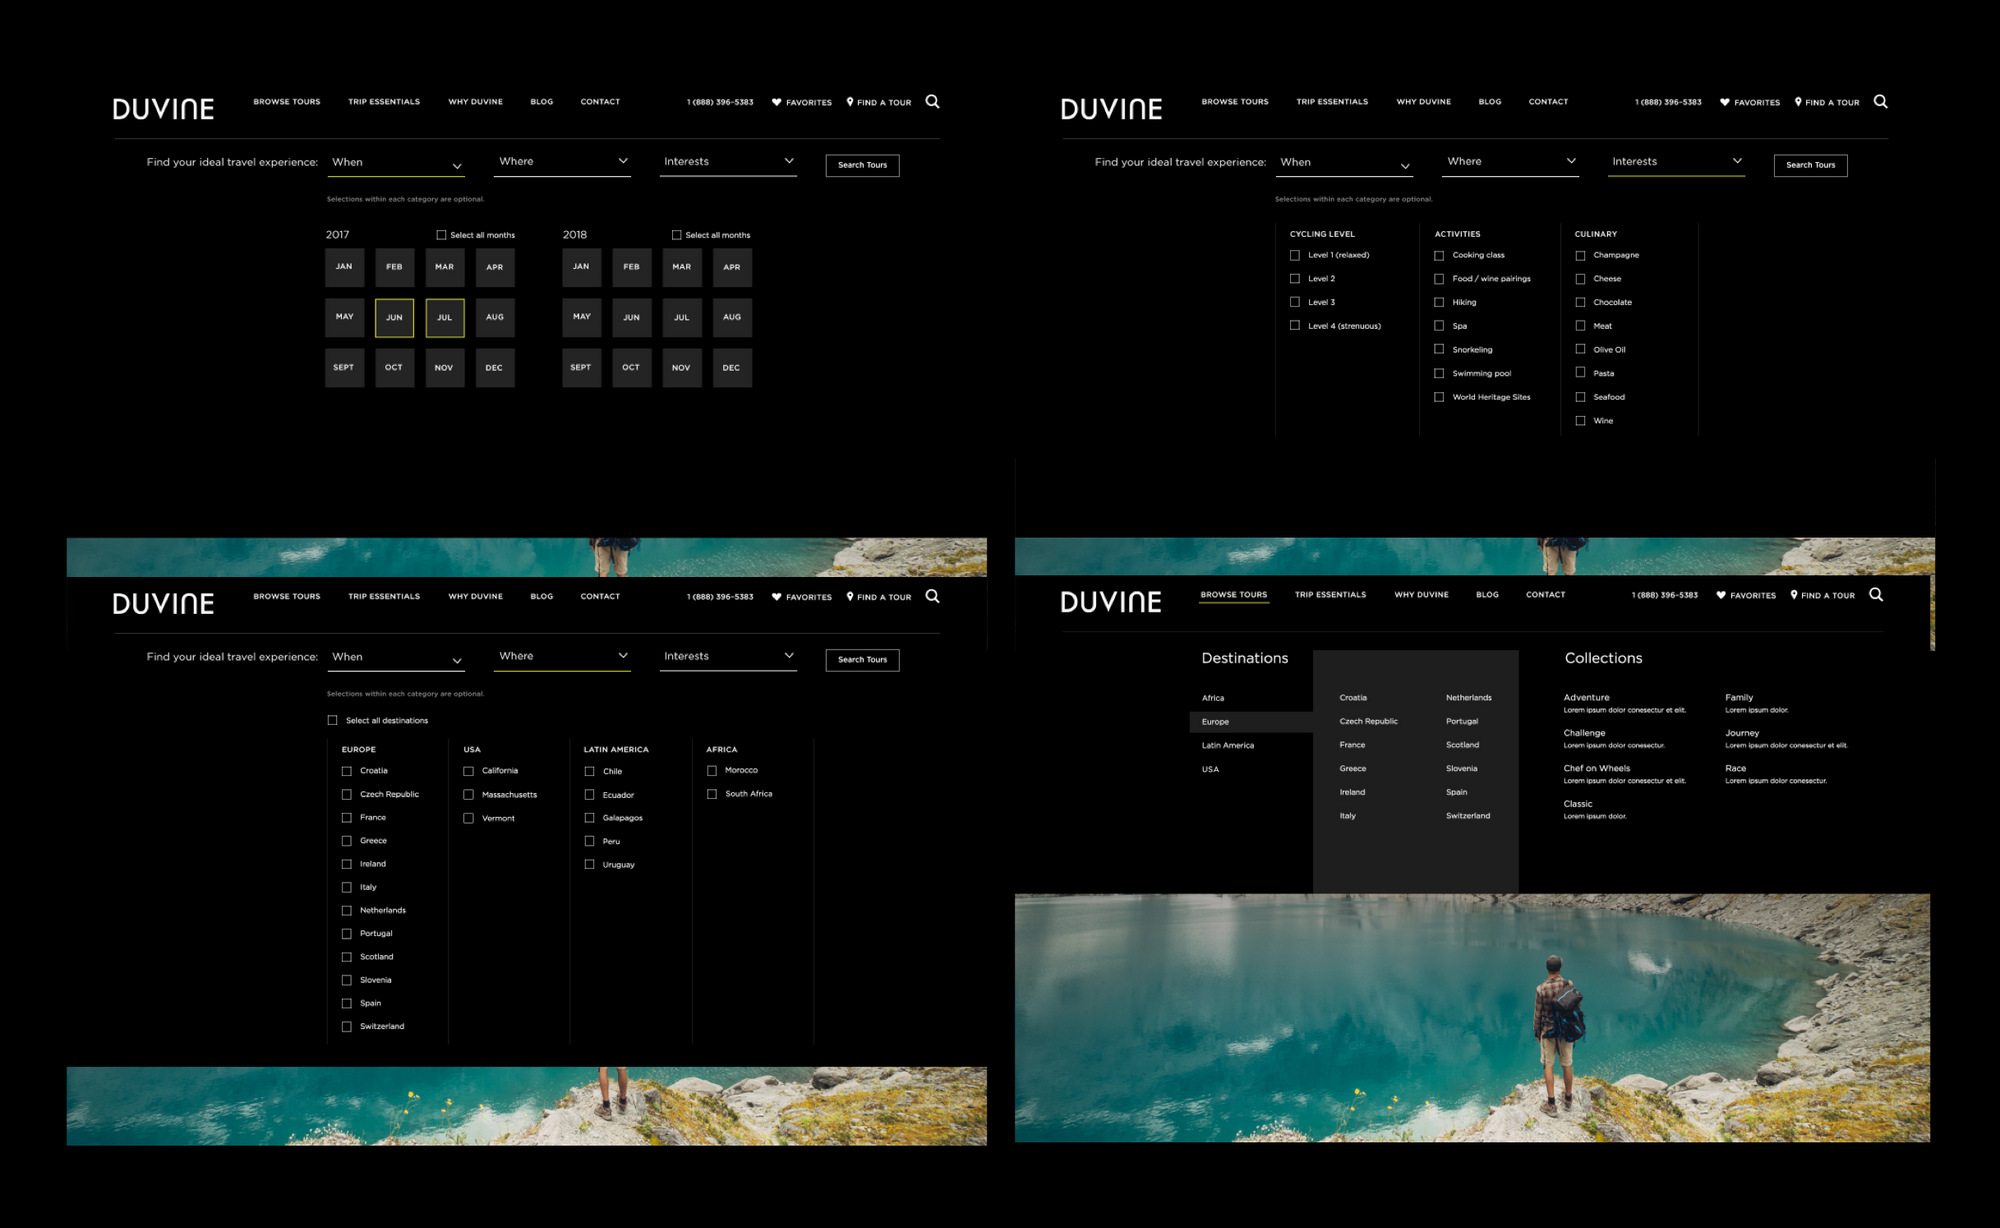 Screenshots of the searching for a trip on the DuVine website